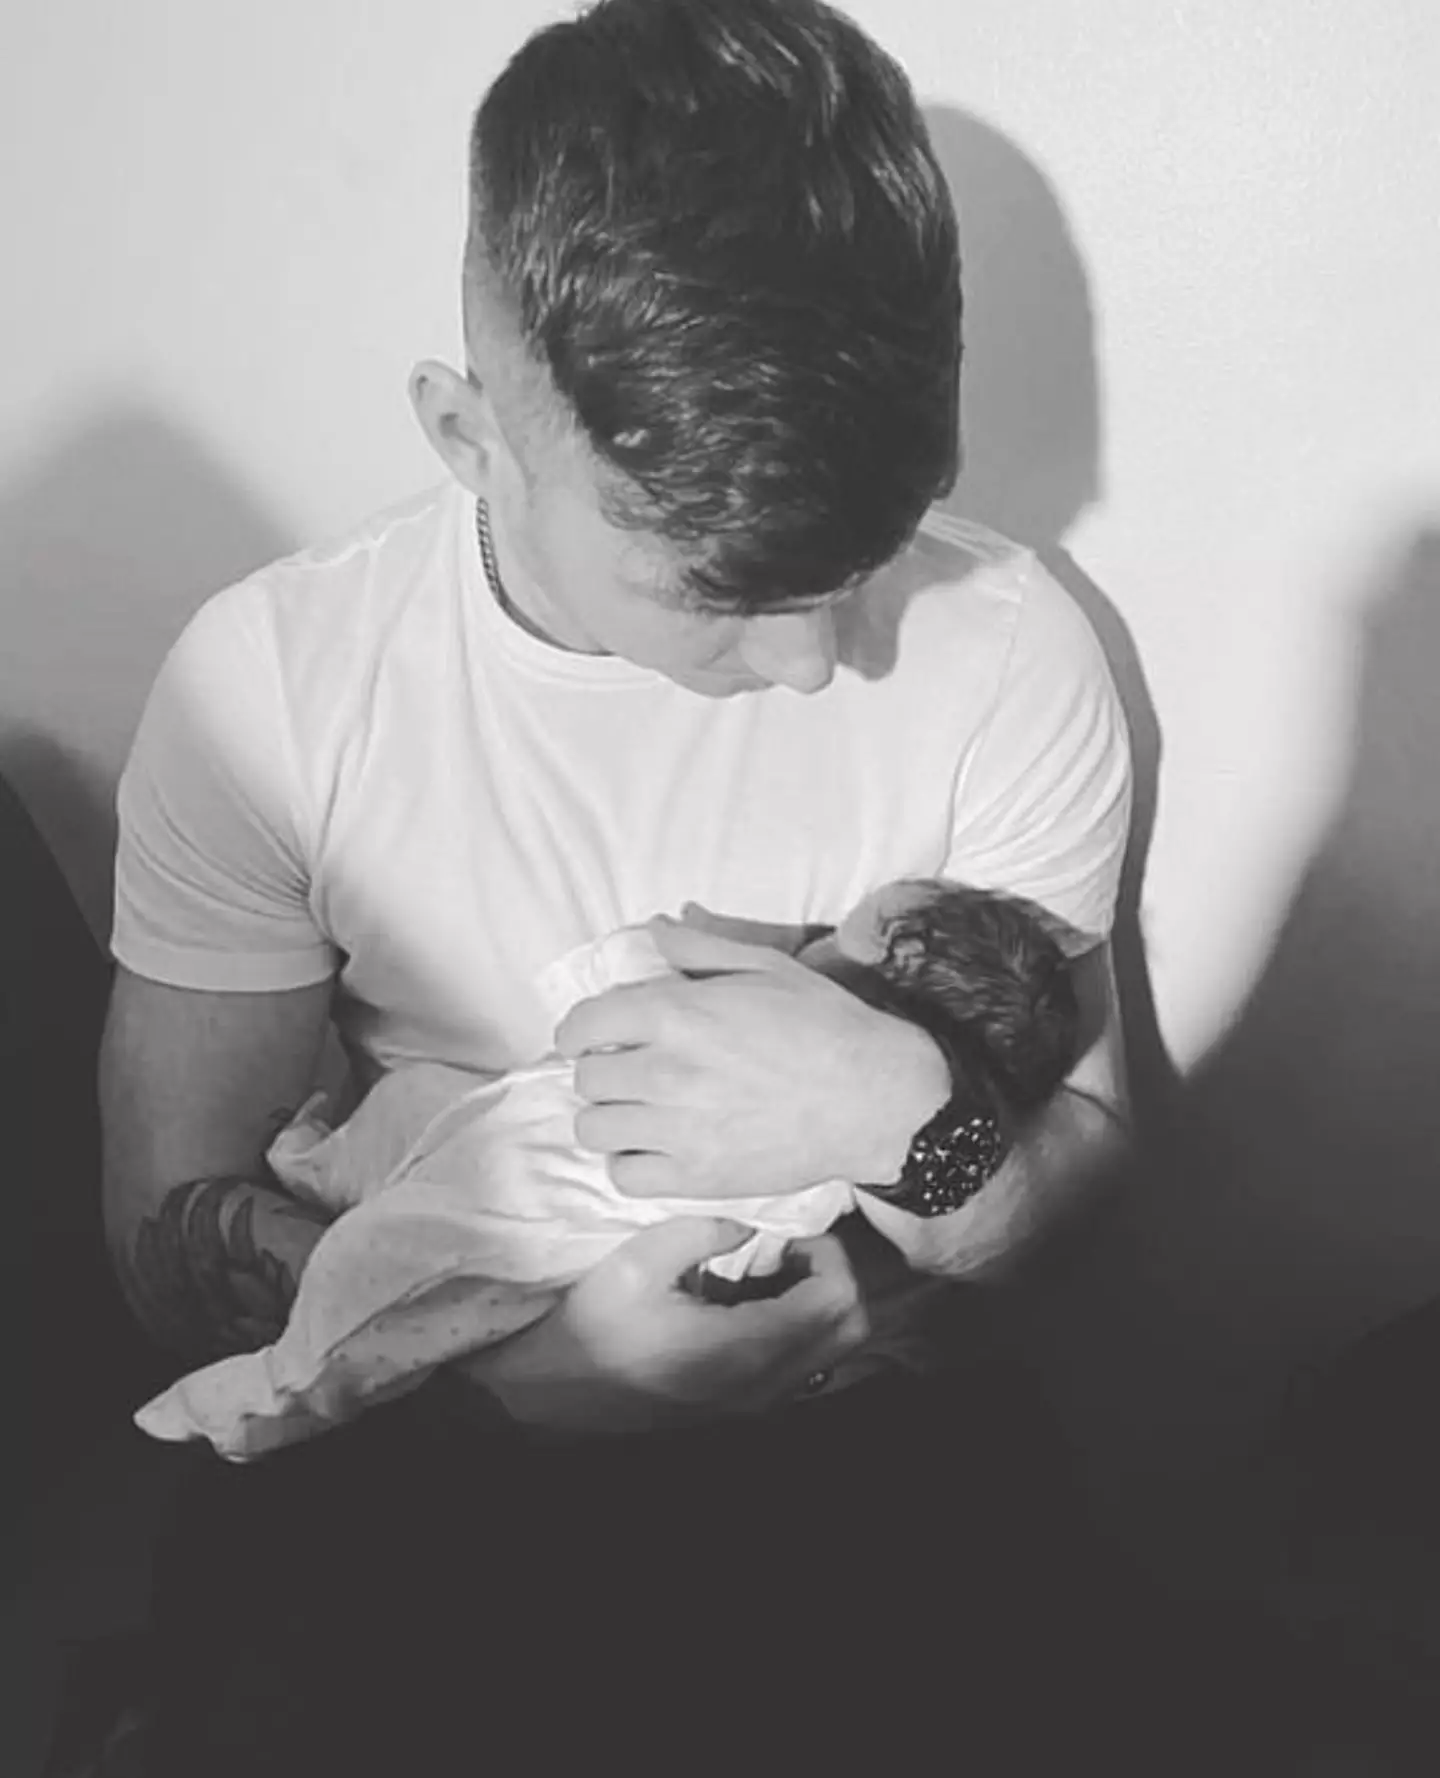 Jack Keating shared an adorable photo of his newborn.